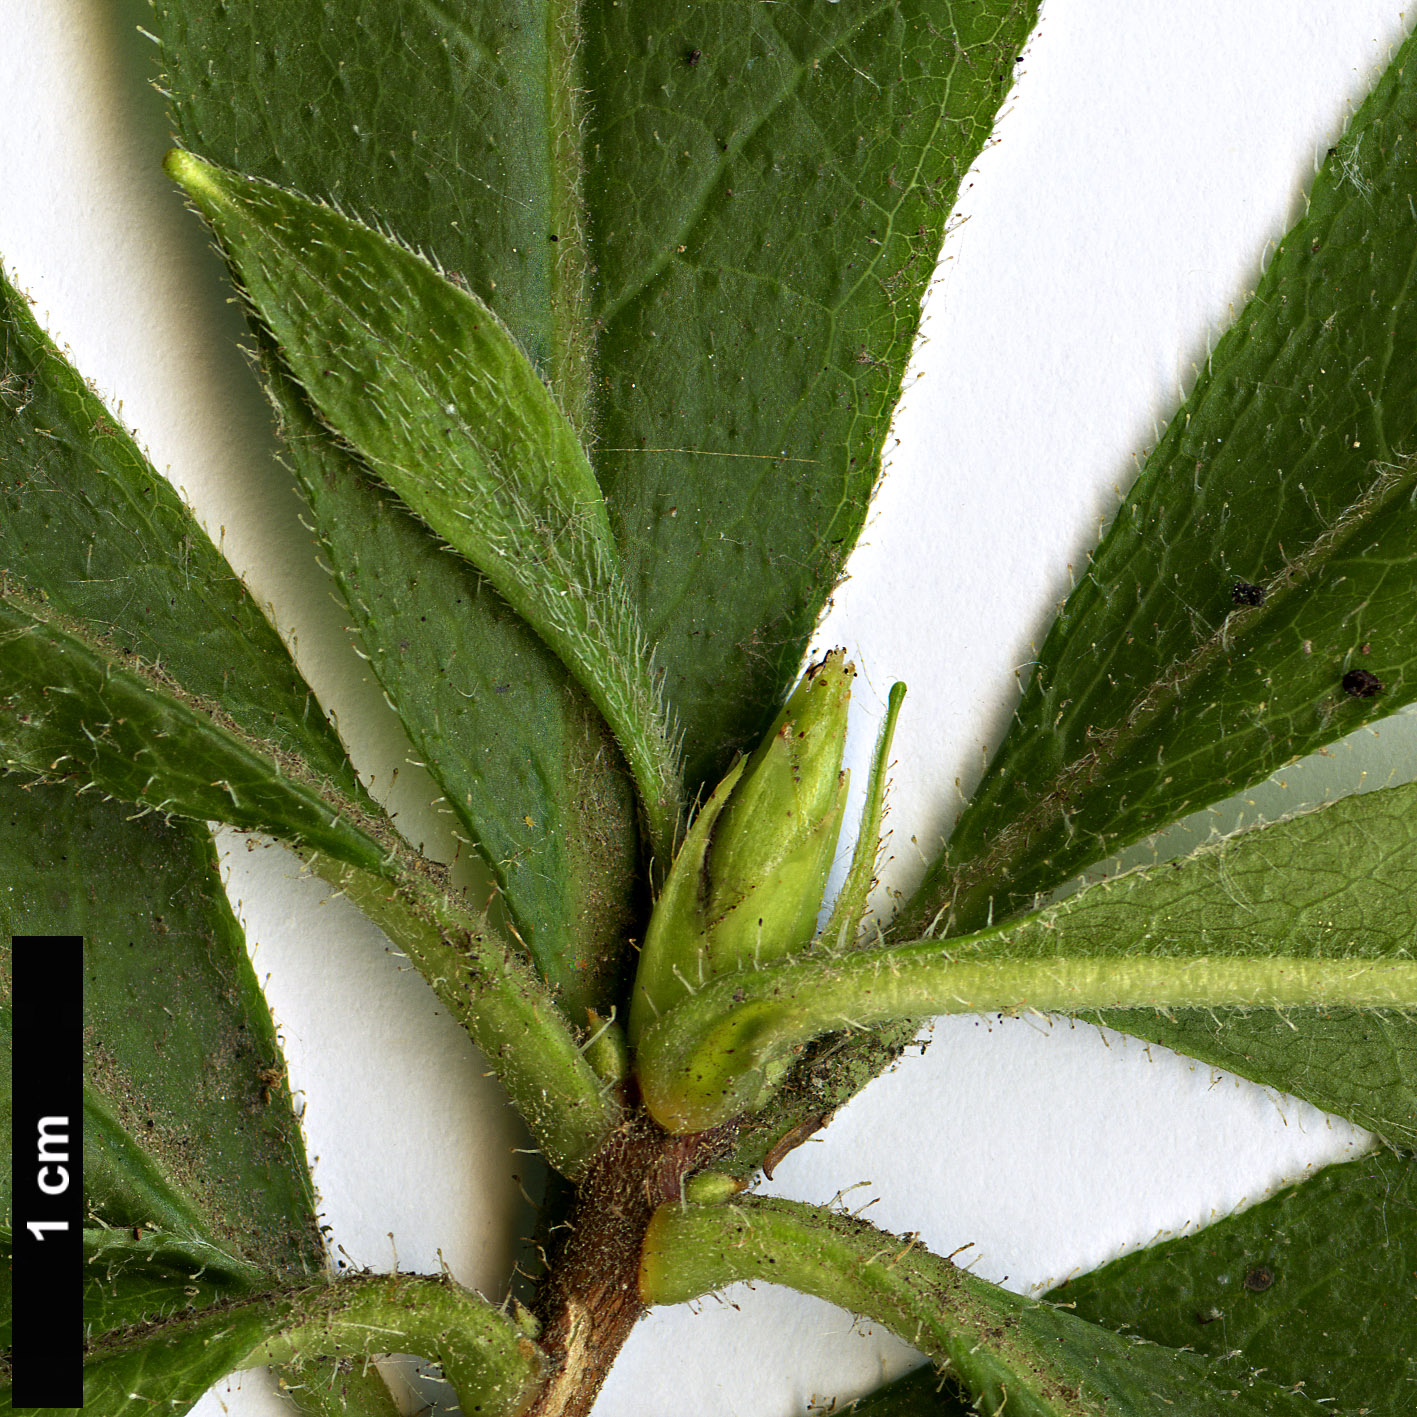 High resolution image: Family: Ericaceae - Genus: Rhododendron - Taxon: luteum